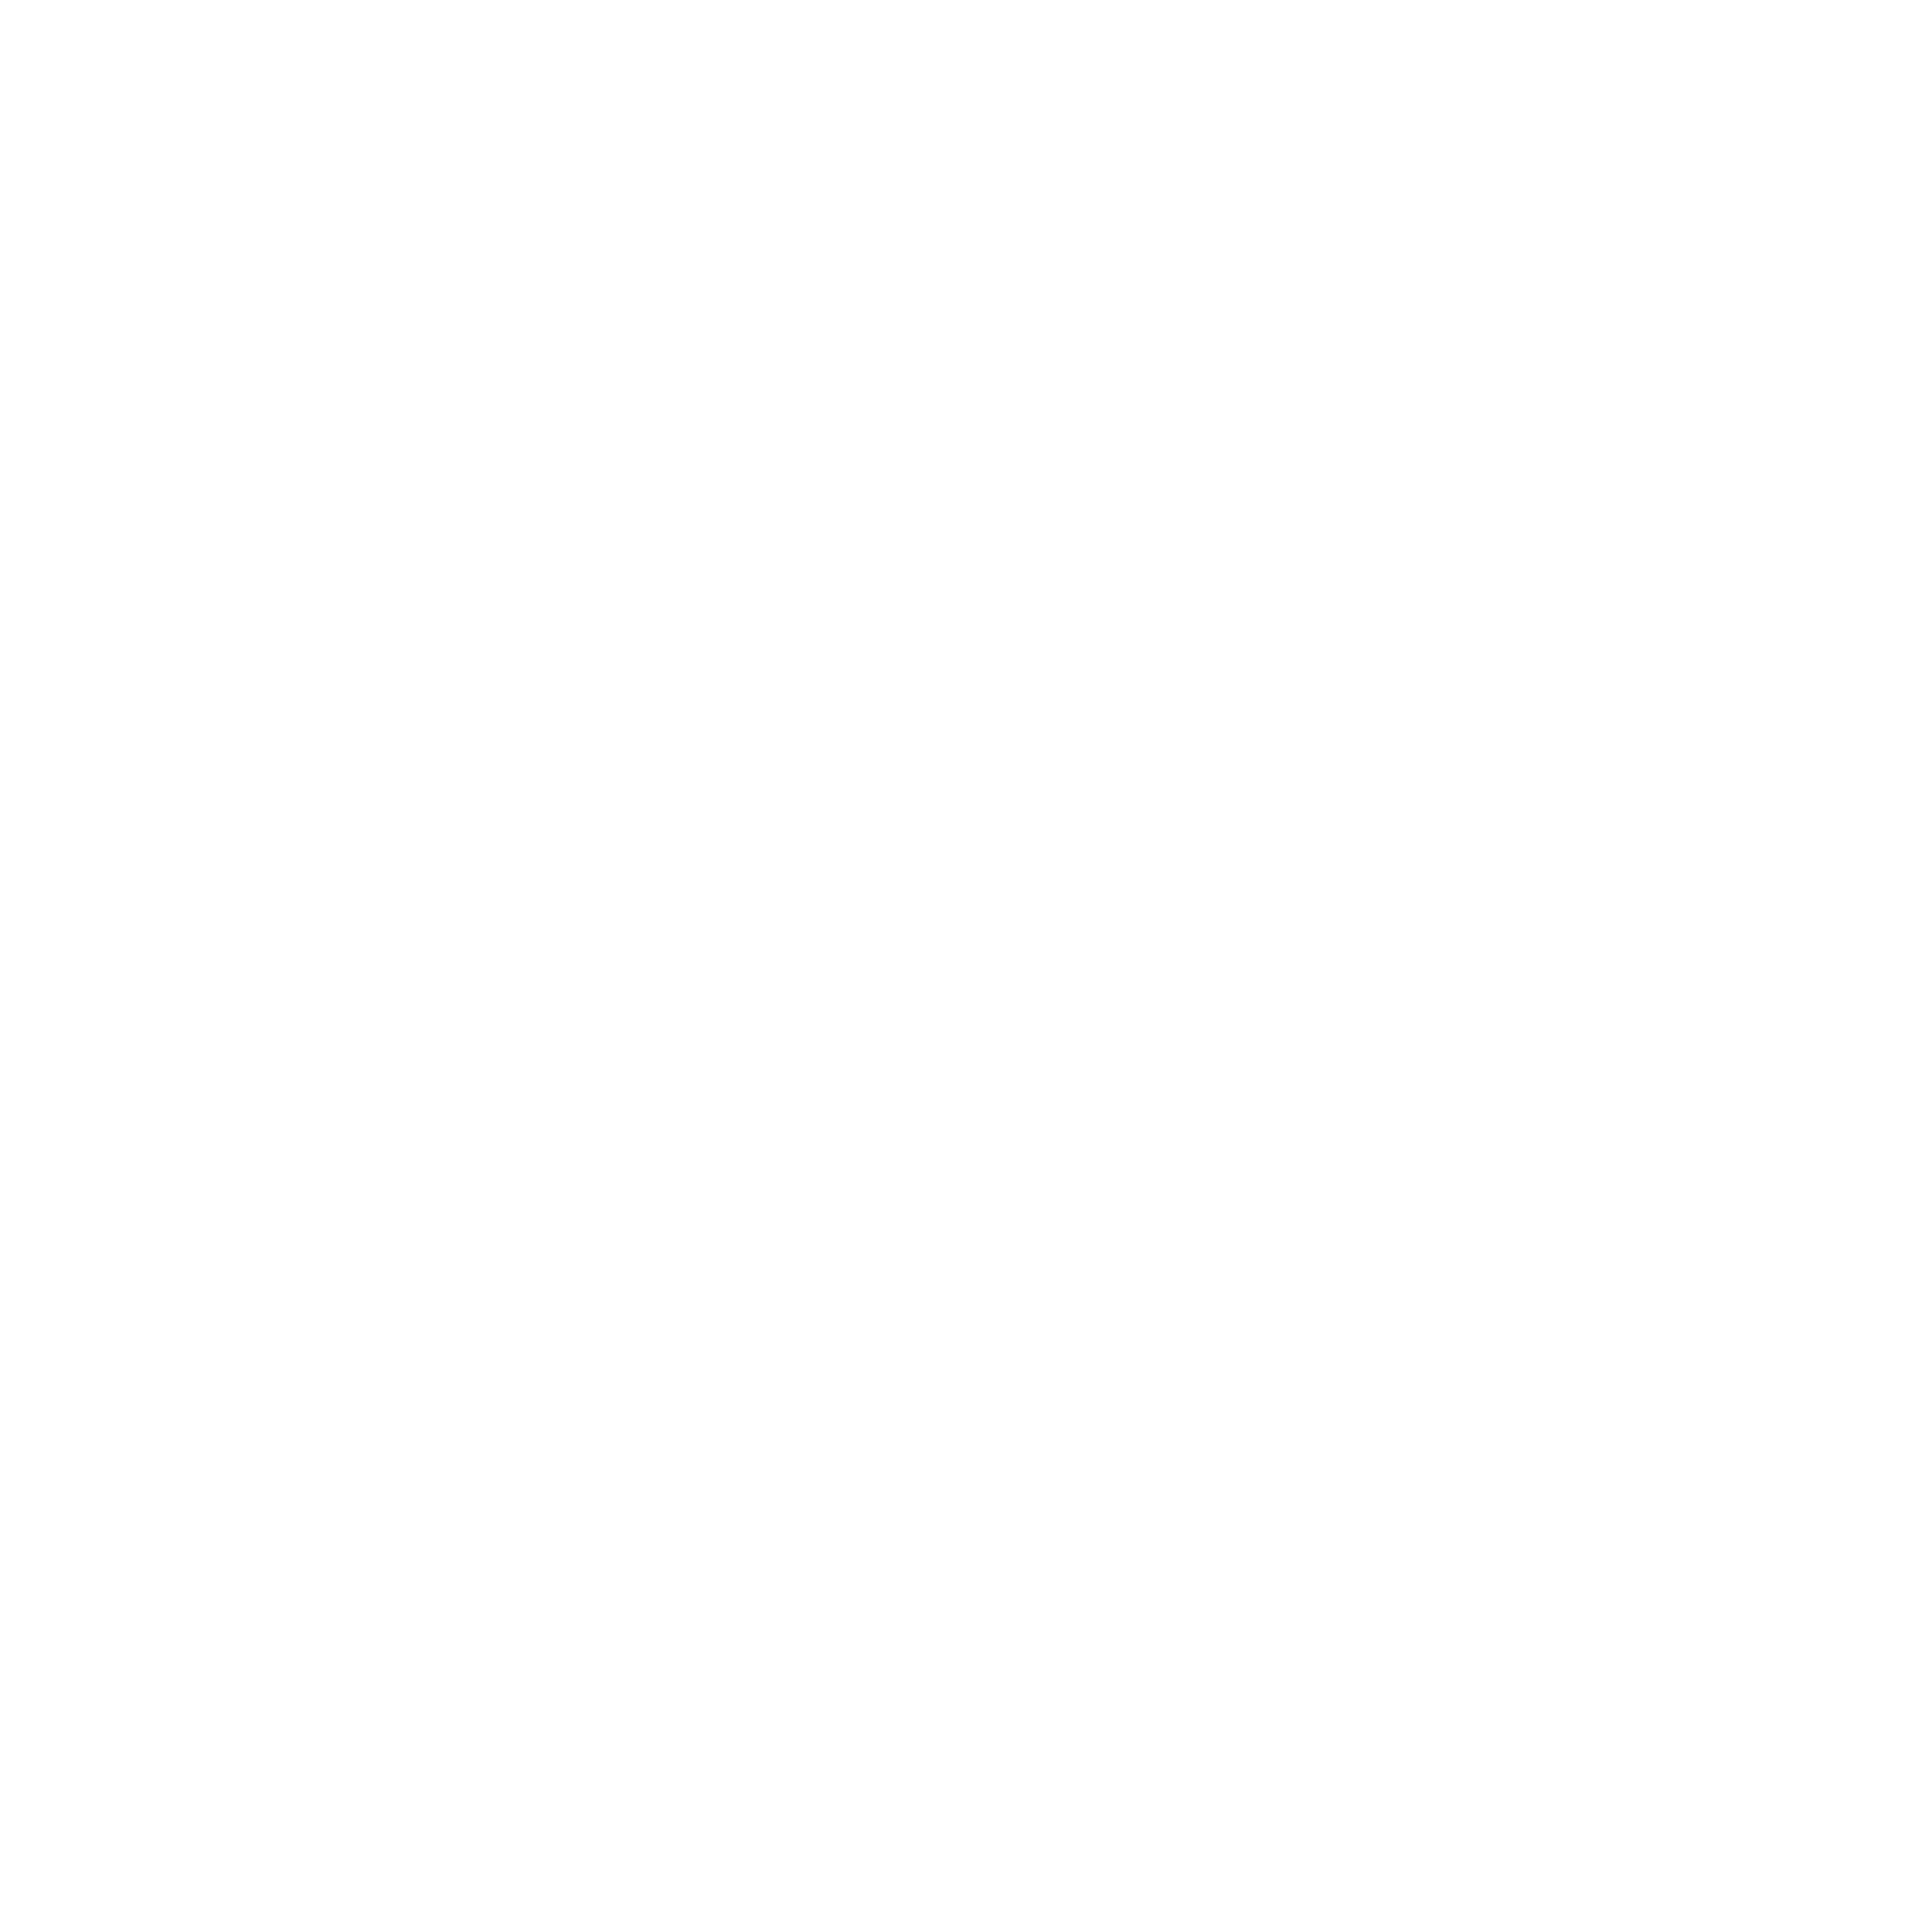 Illustrated map of the UK